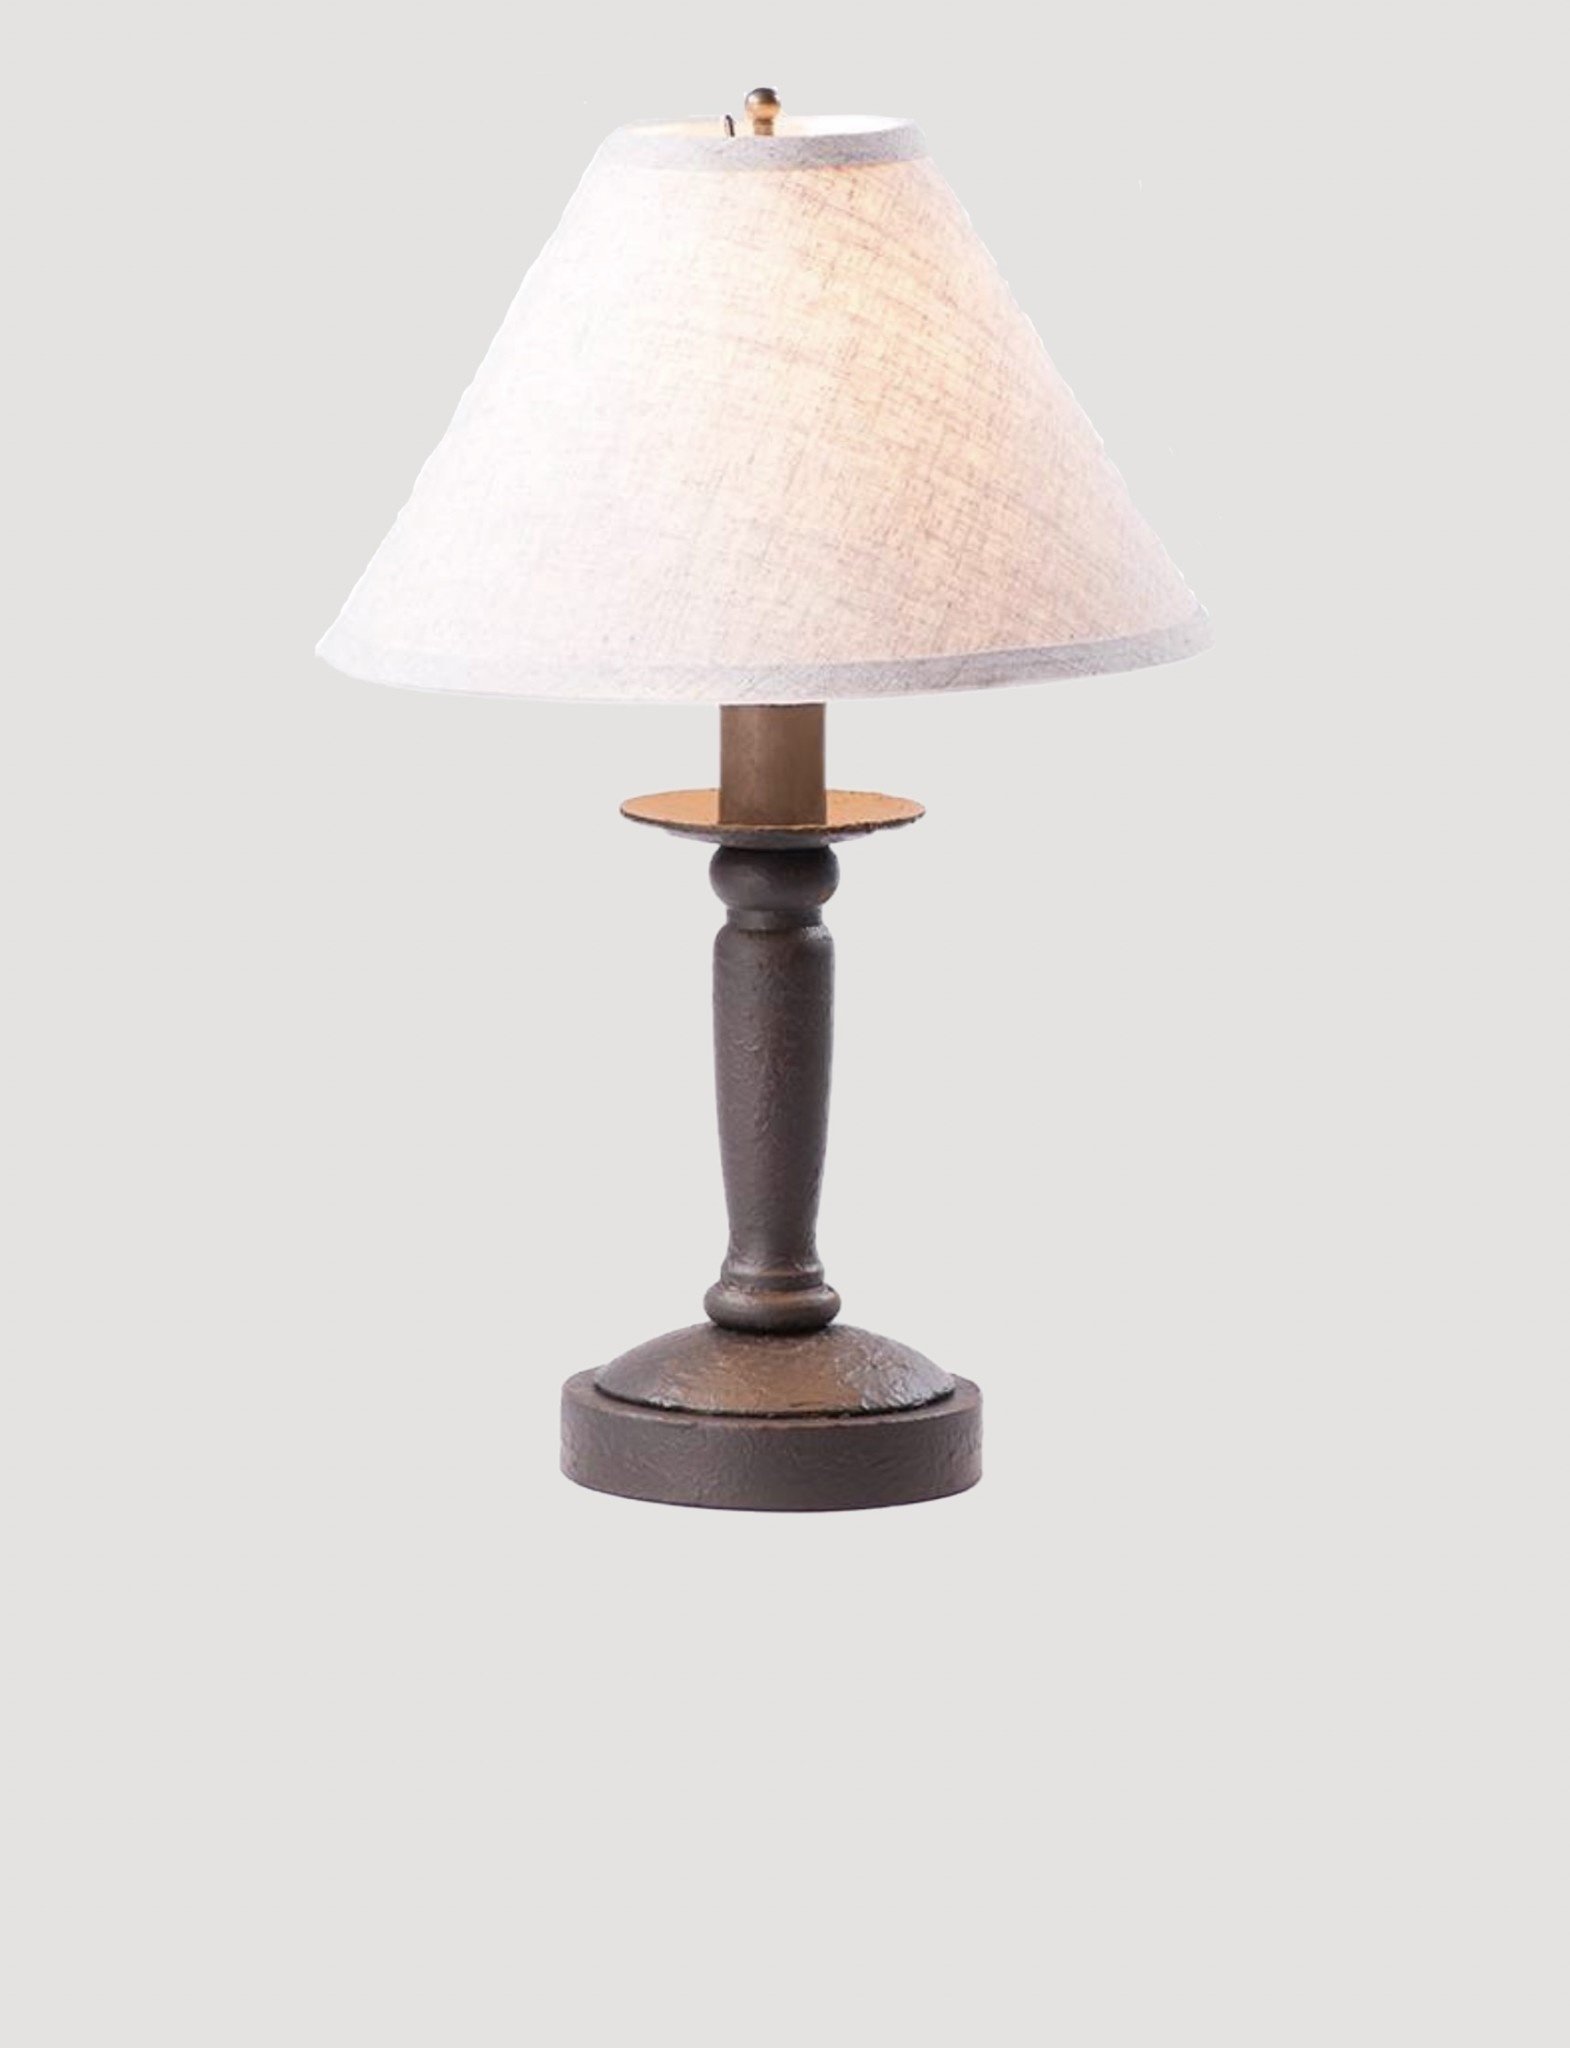 Irvin's Tinware Butcher Lamp with Ivory Linen Shade Brand: Irvin's Tinware